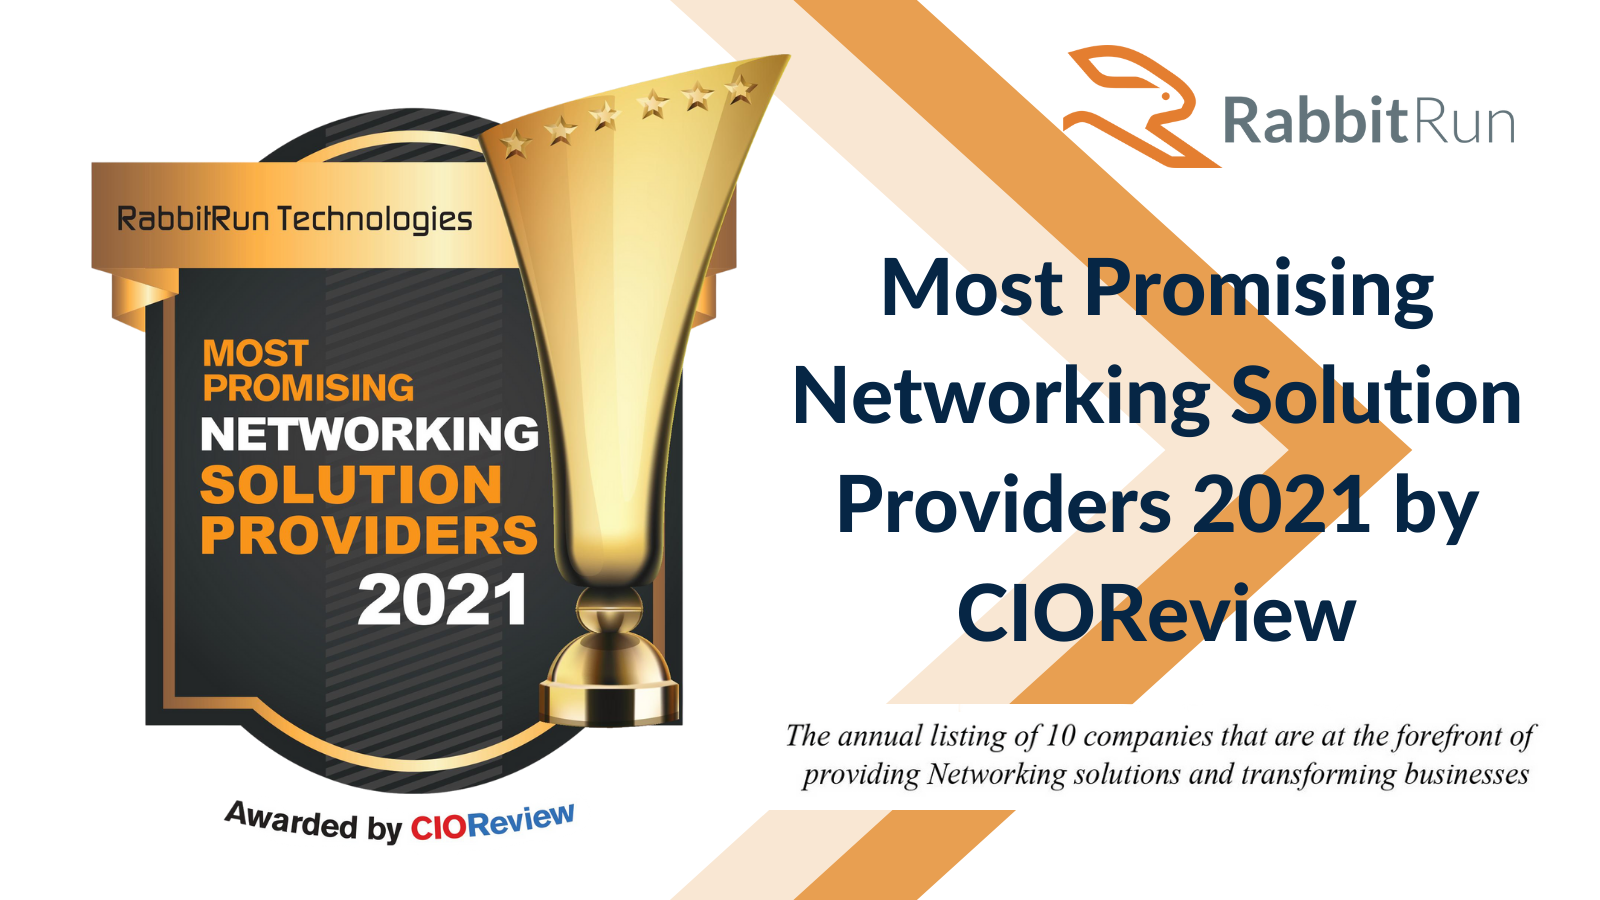 RabbitRun Technologies Recognized as Most Promising Networking Solution Providers 2021 – CIOReview